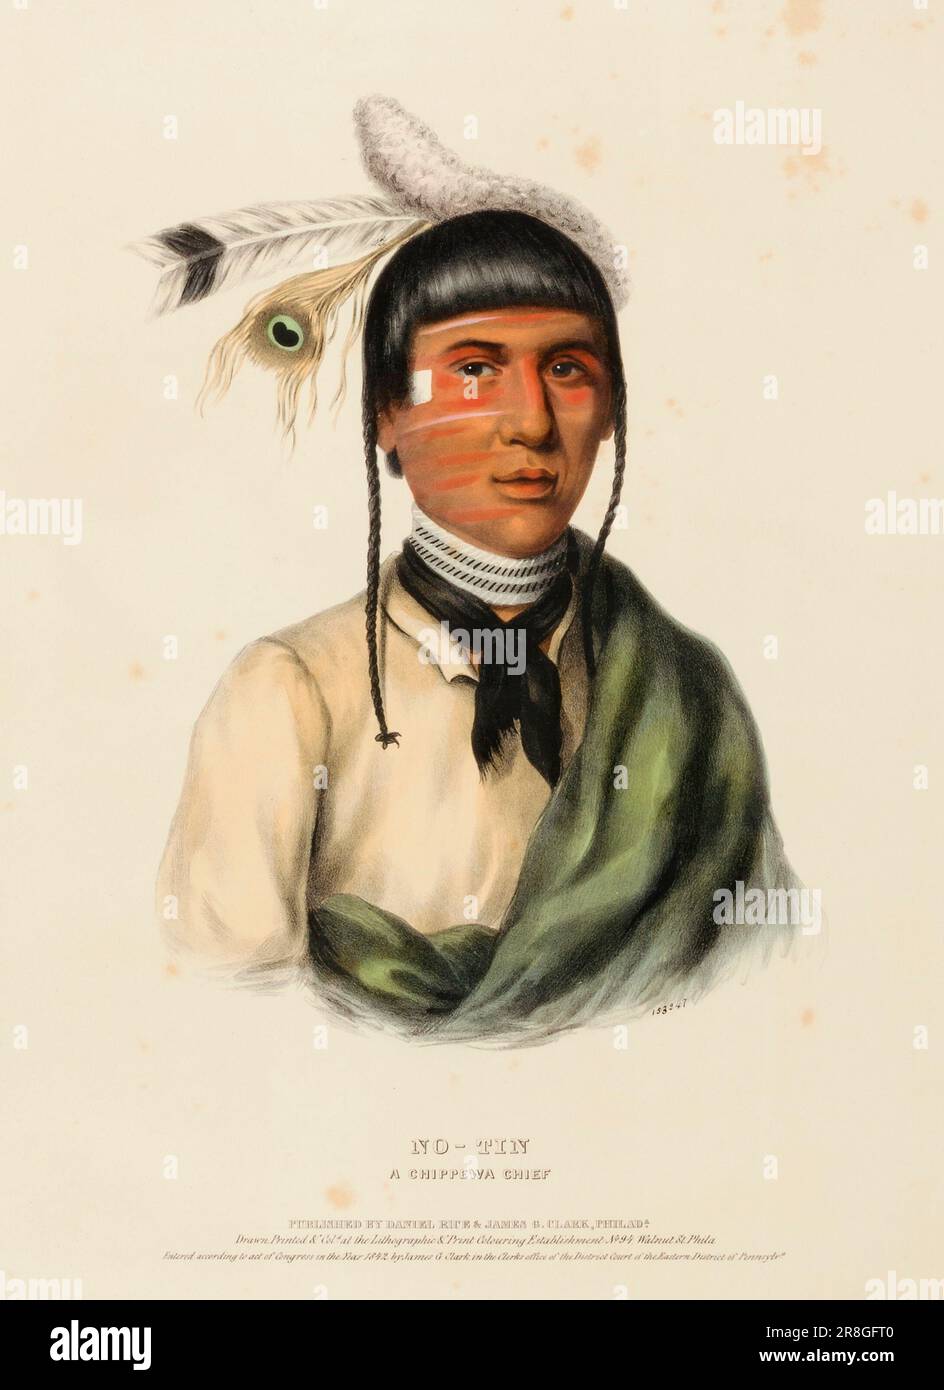 NO-TIN. A CHIPPEWA CHIEF., from History of the Indian Tribes of North America ca. 1842 by McKenney and Hall, 1836-1844 Stock Photo